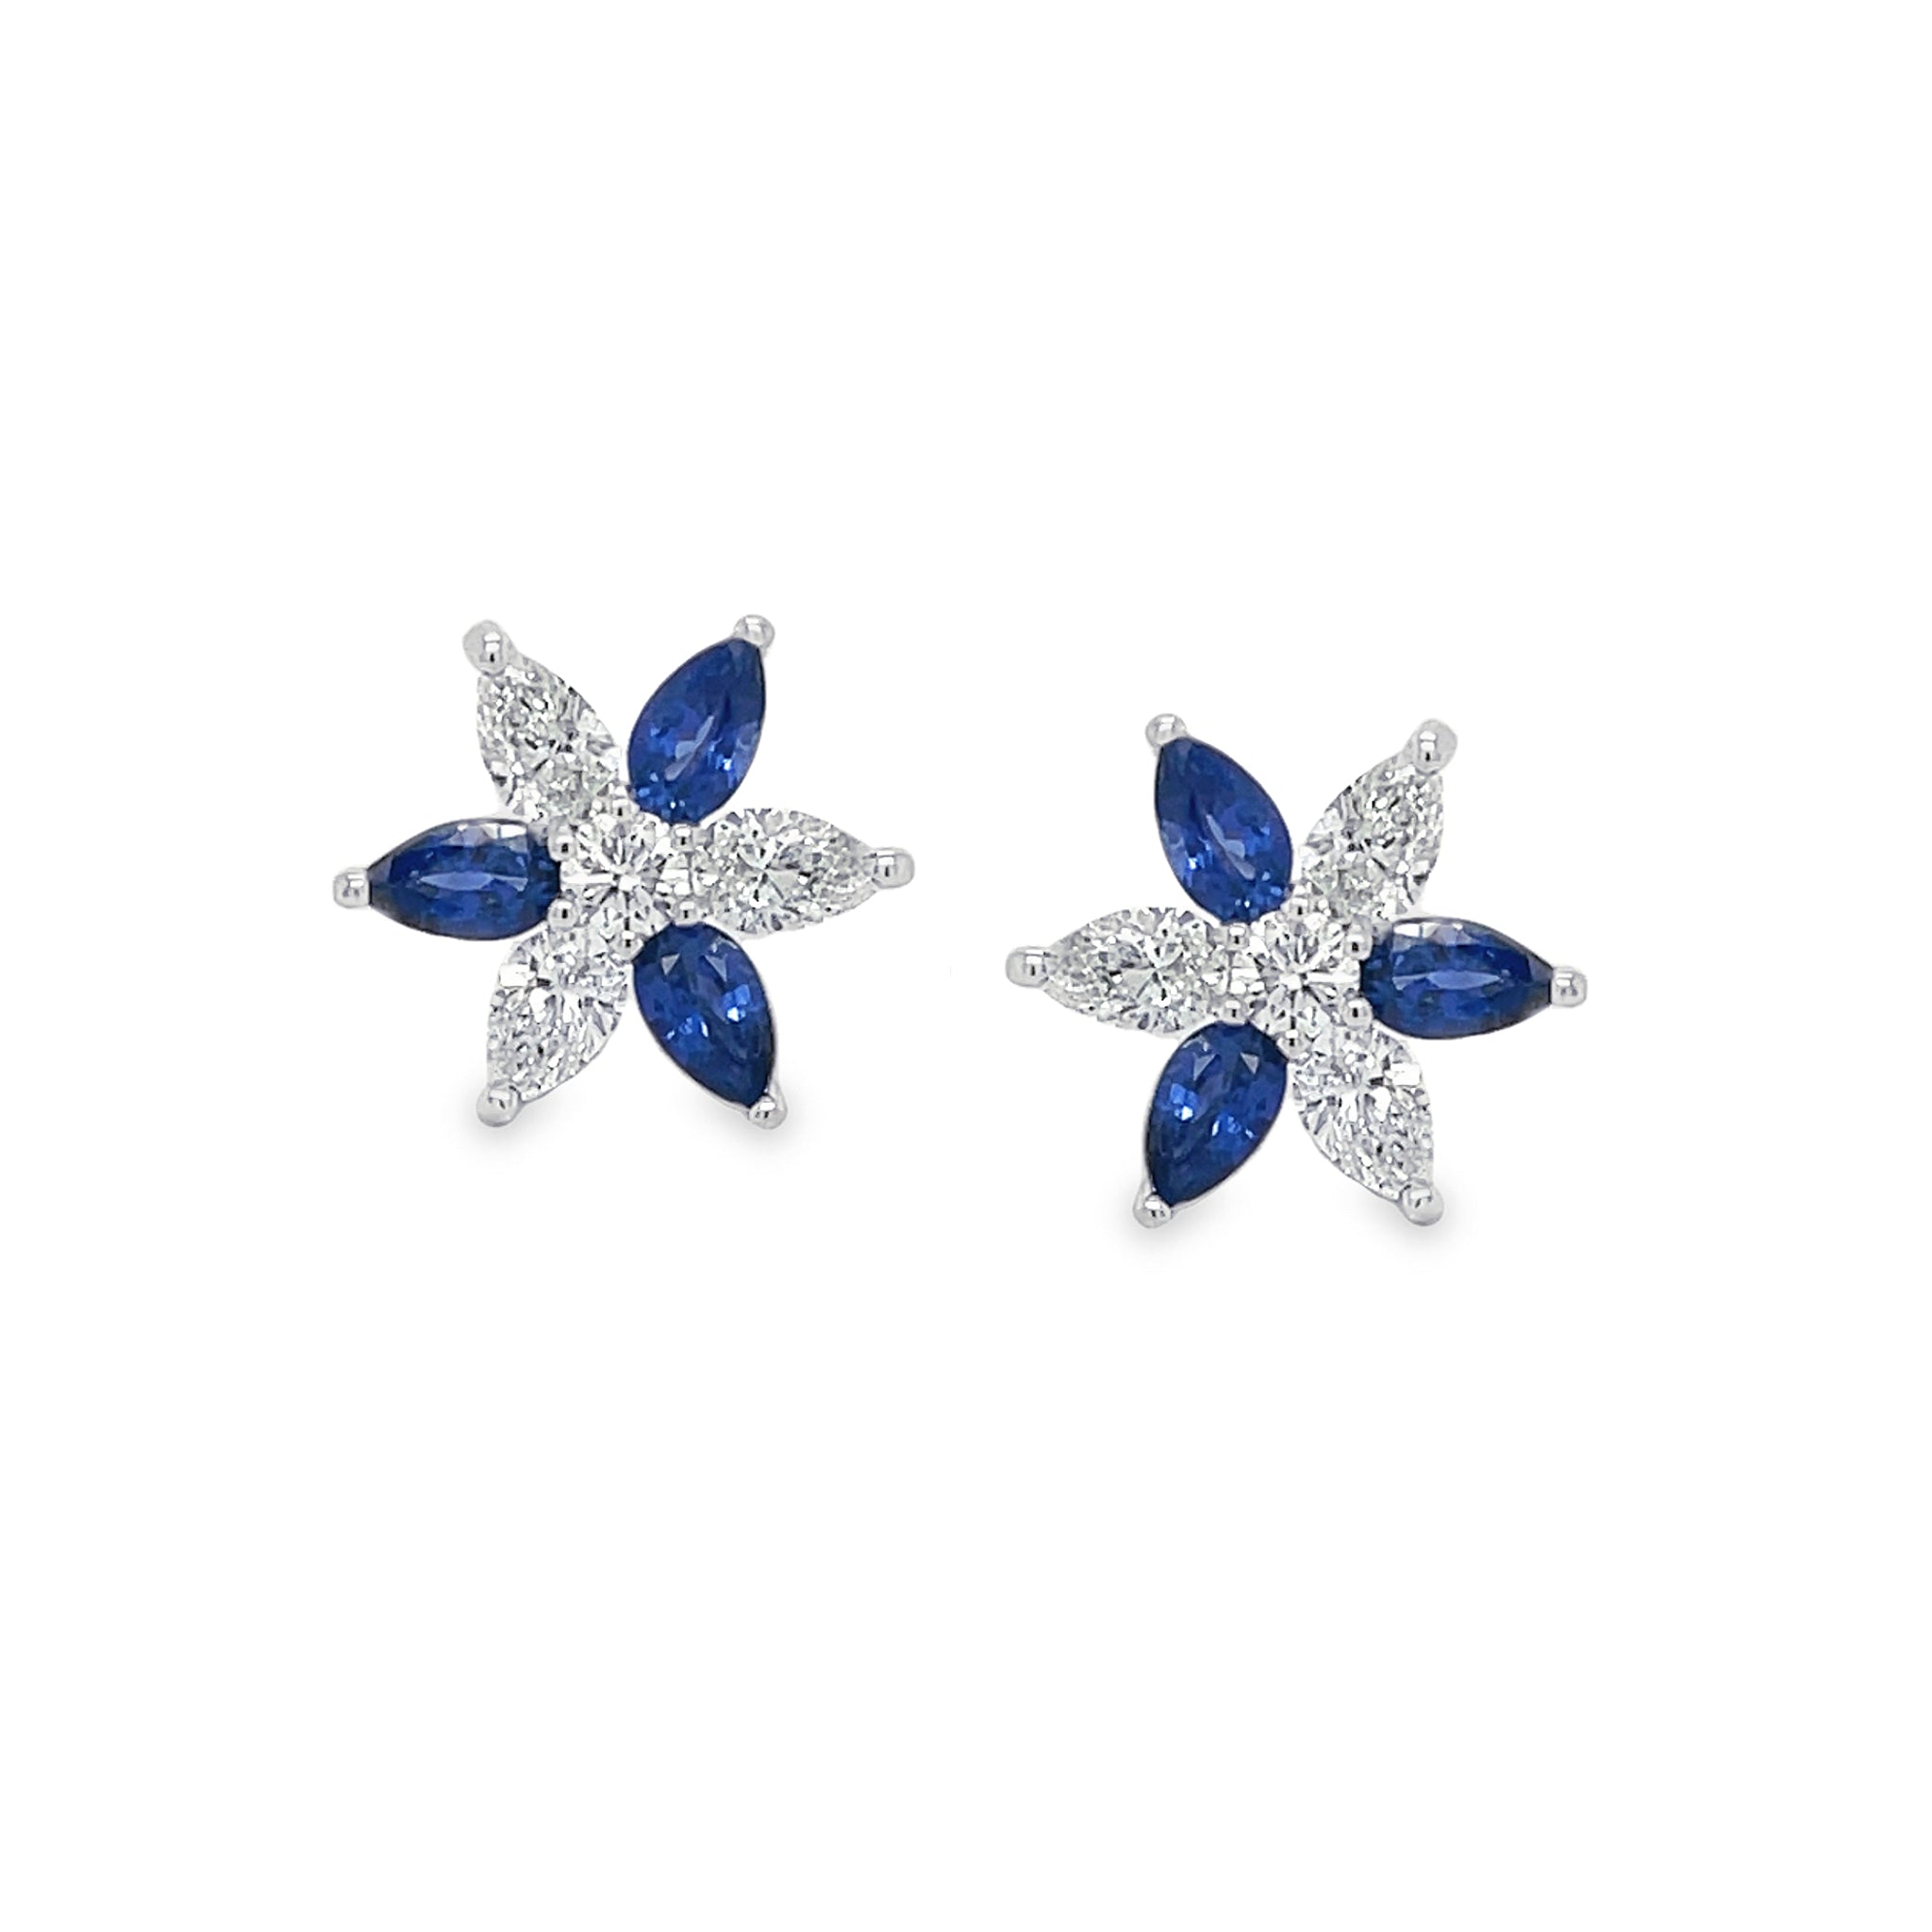 Diamond and Sapphire Cluster Earrings